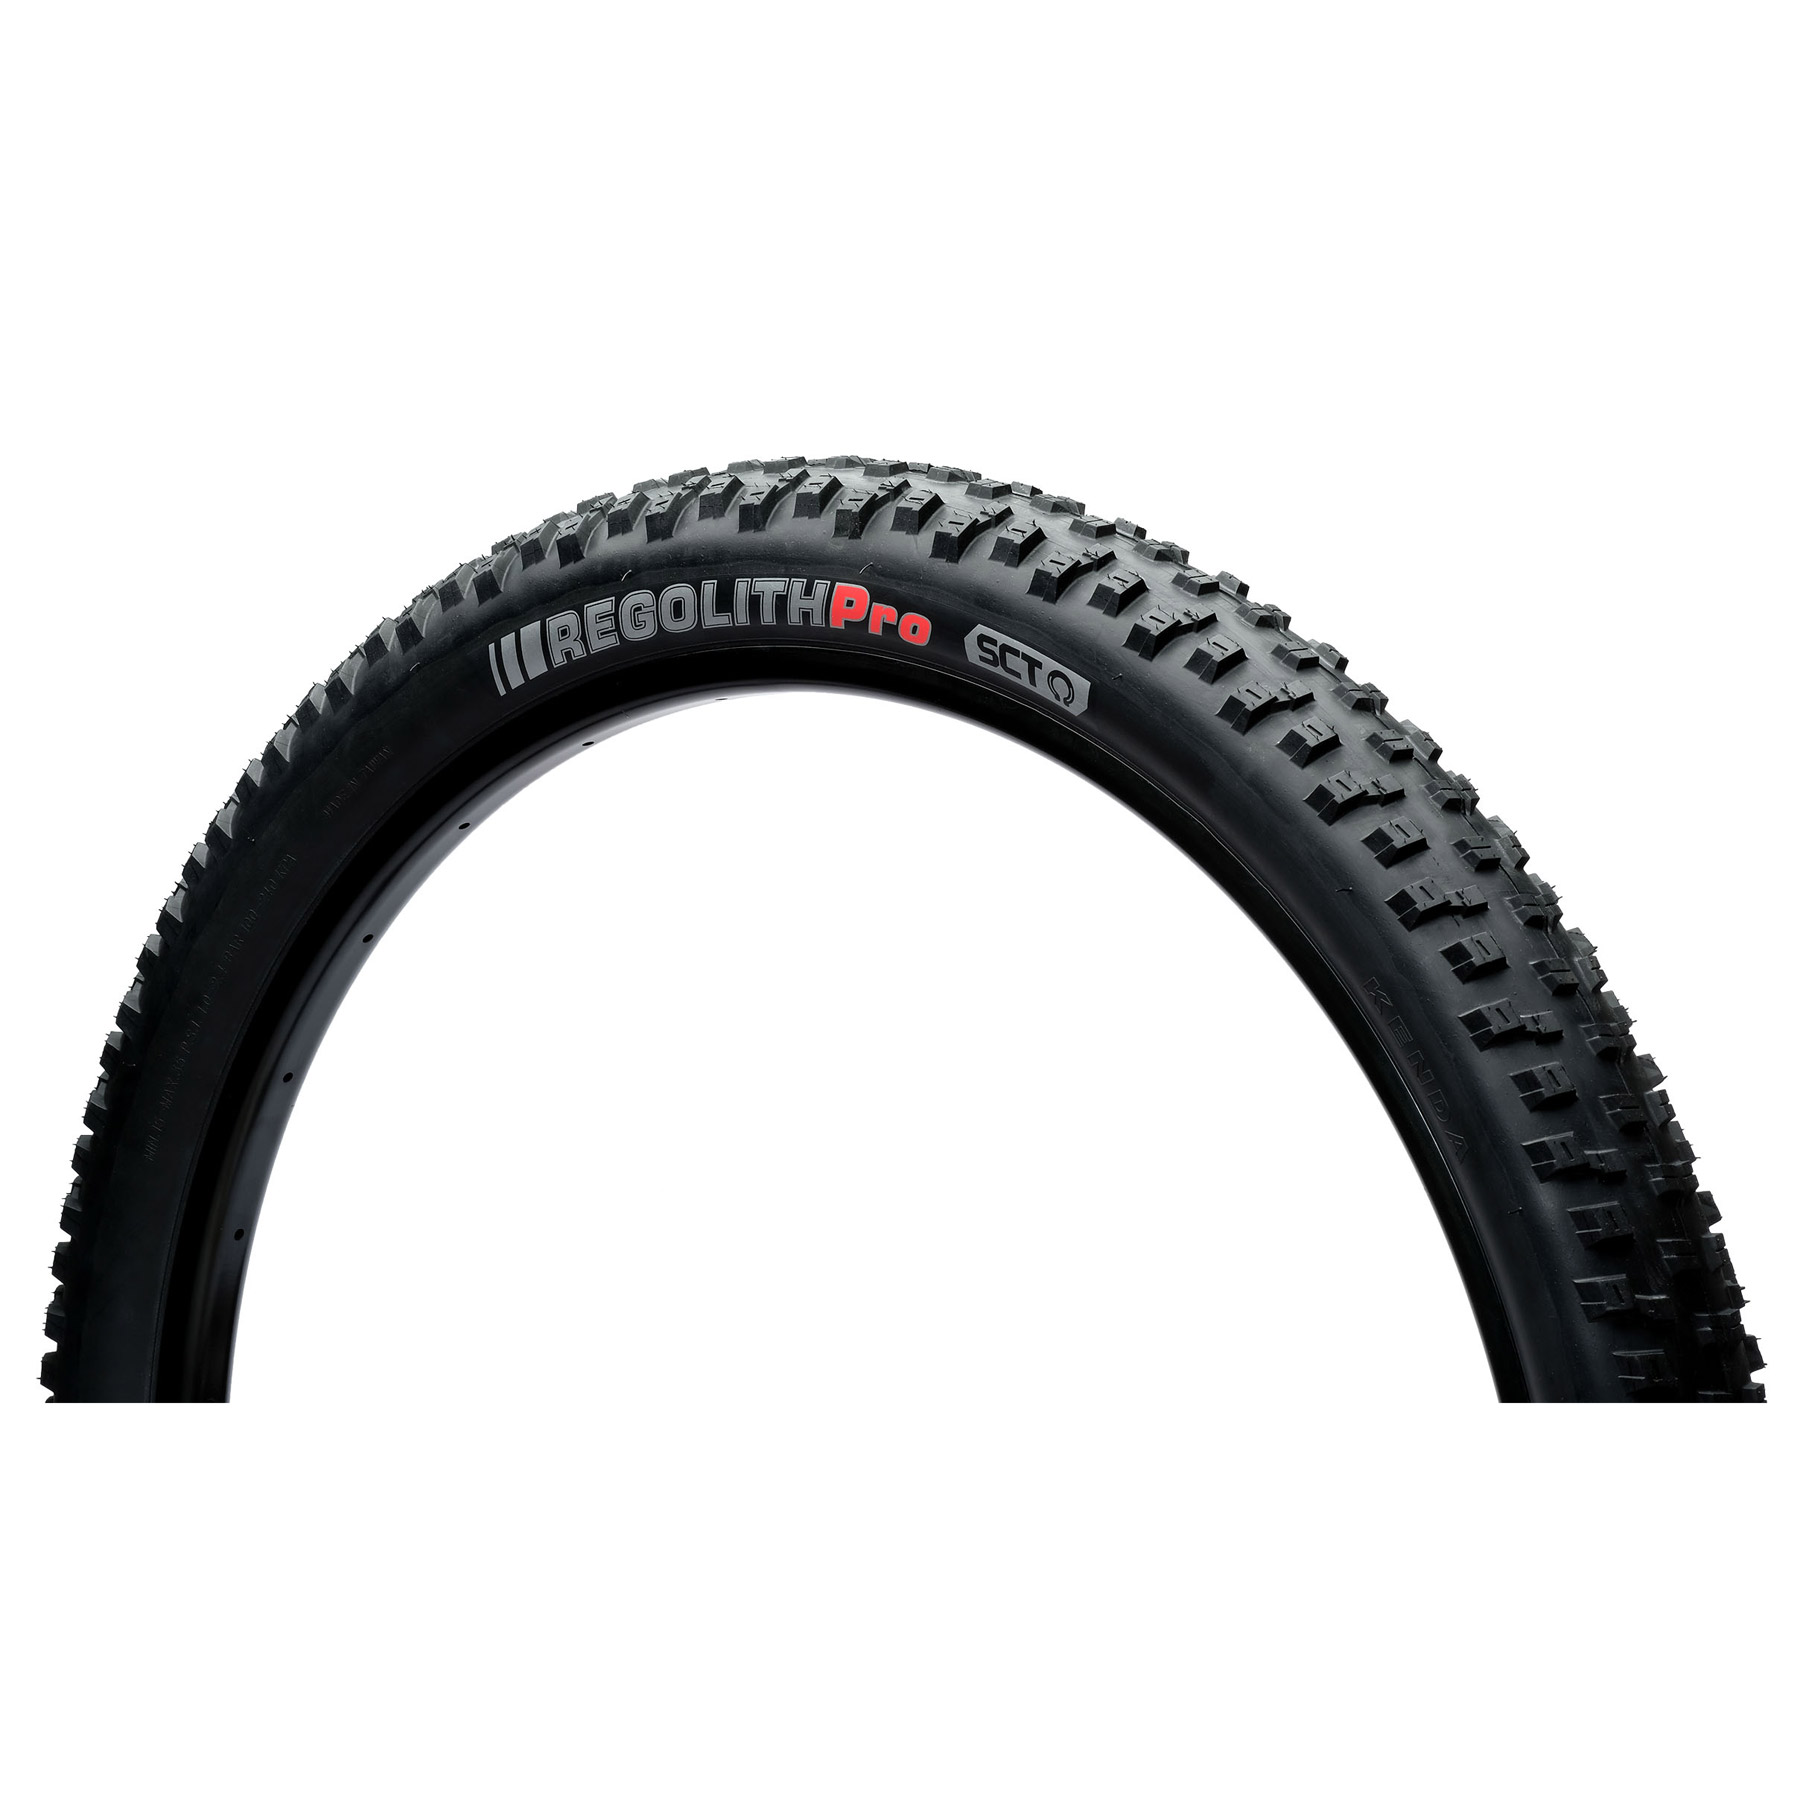 Picture of Kenda Regolith Pro SCT Folding Tire - 29x2.40 Inches